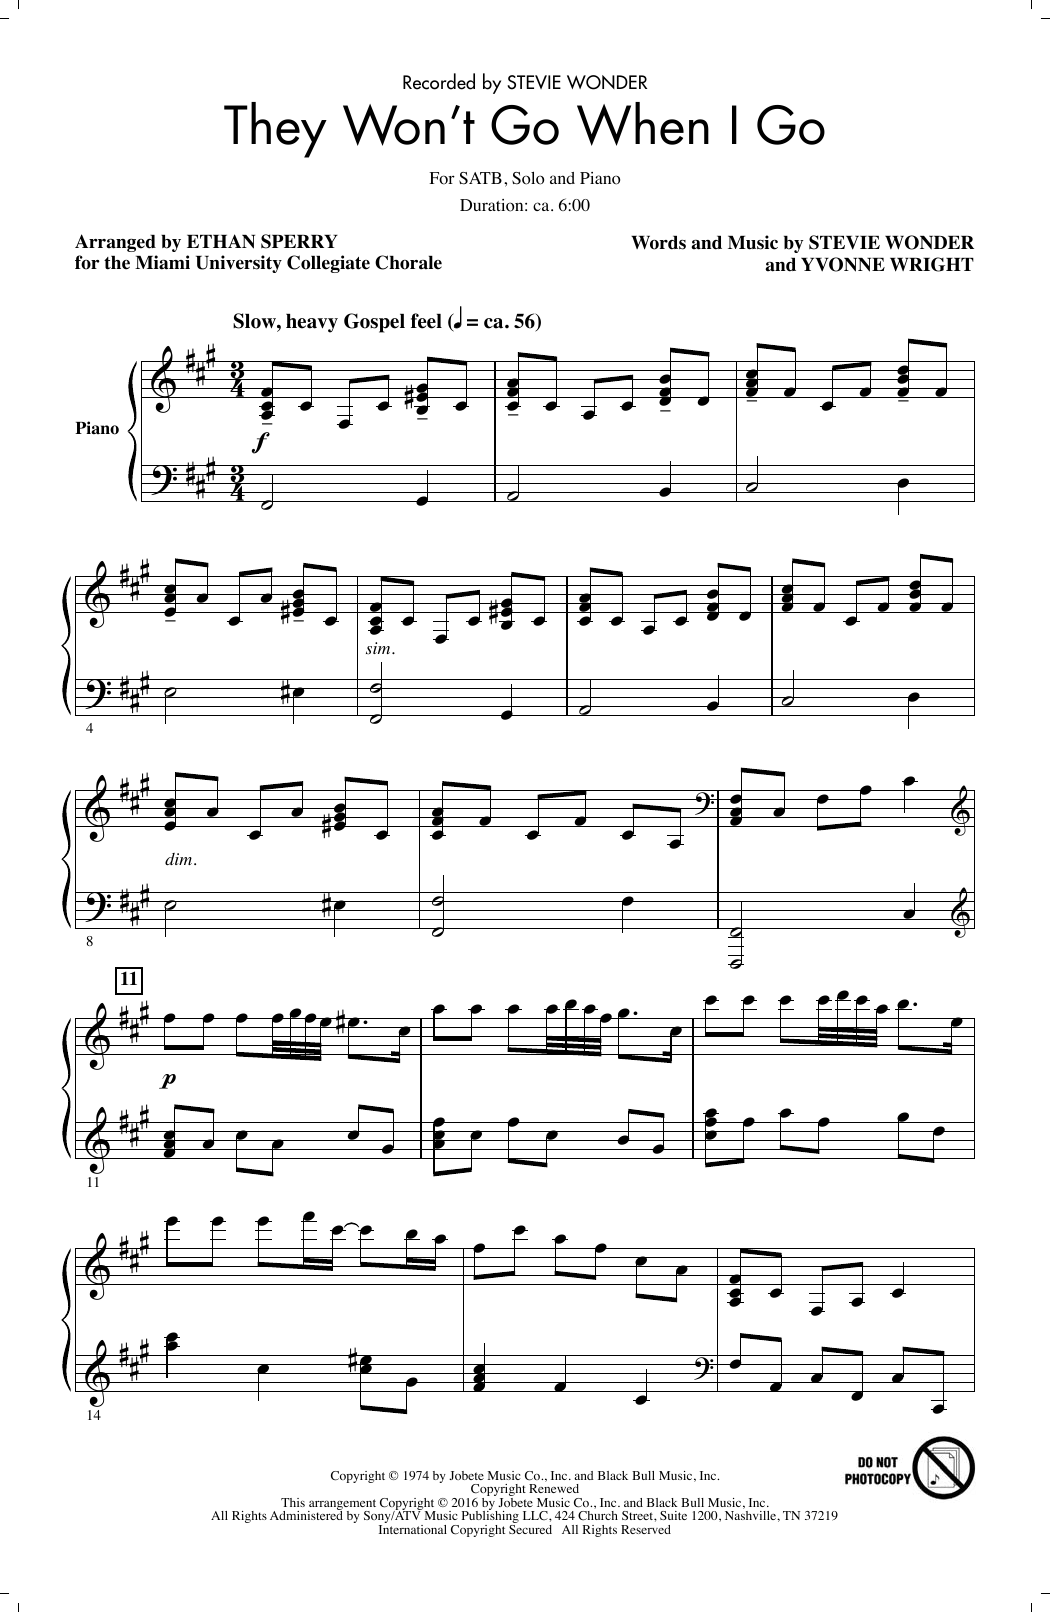 Download Ethan Sperry They Won't Go When I Go Sheet Music